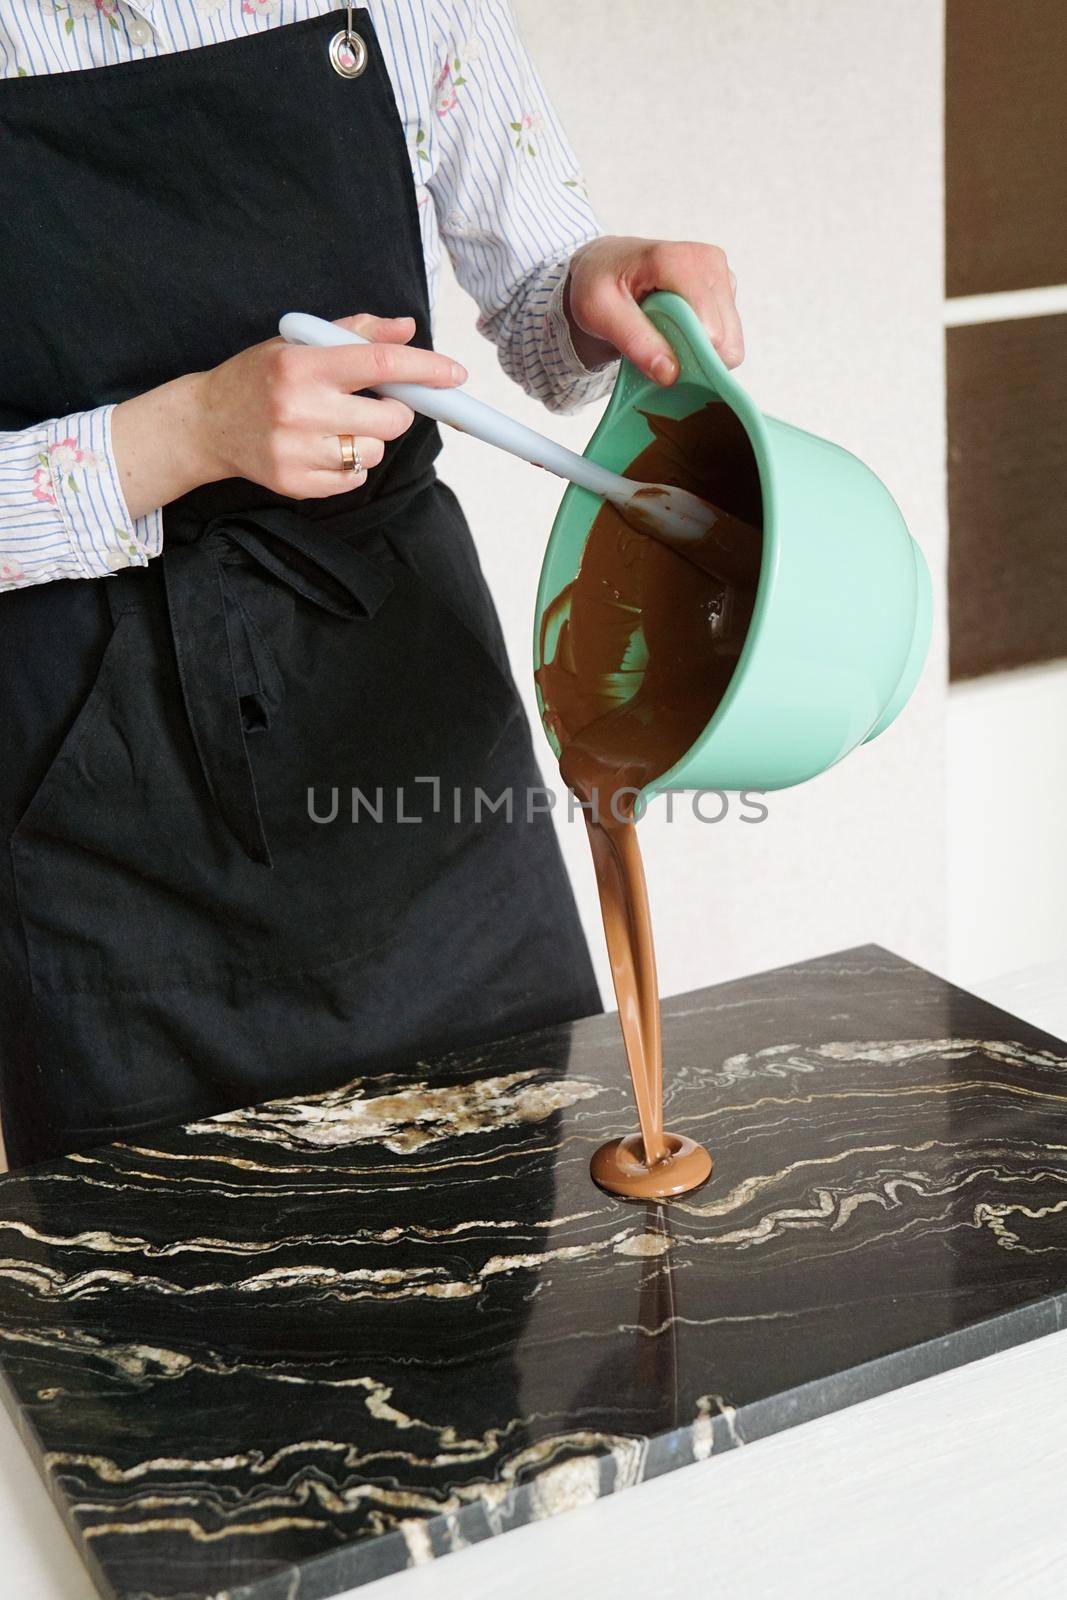 Closeup photo - woman stirs chocolate and pours on a stone board for making homemade chocolates. Candy making, pastry production, dessert concept